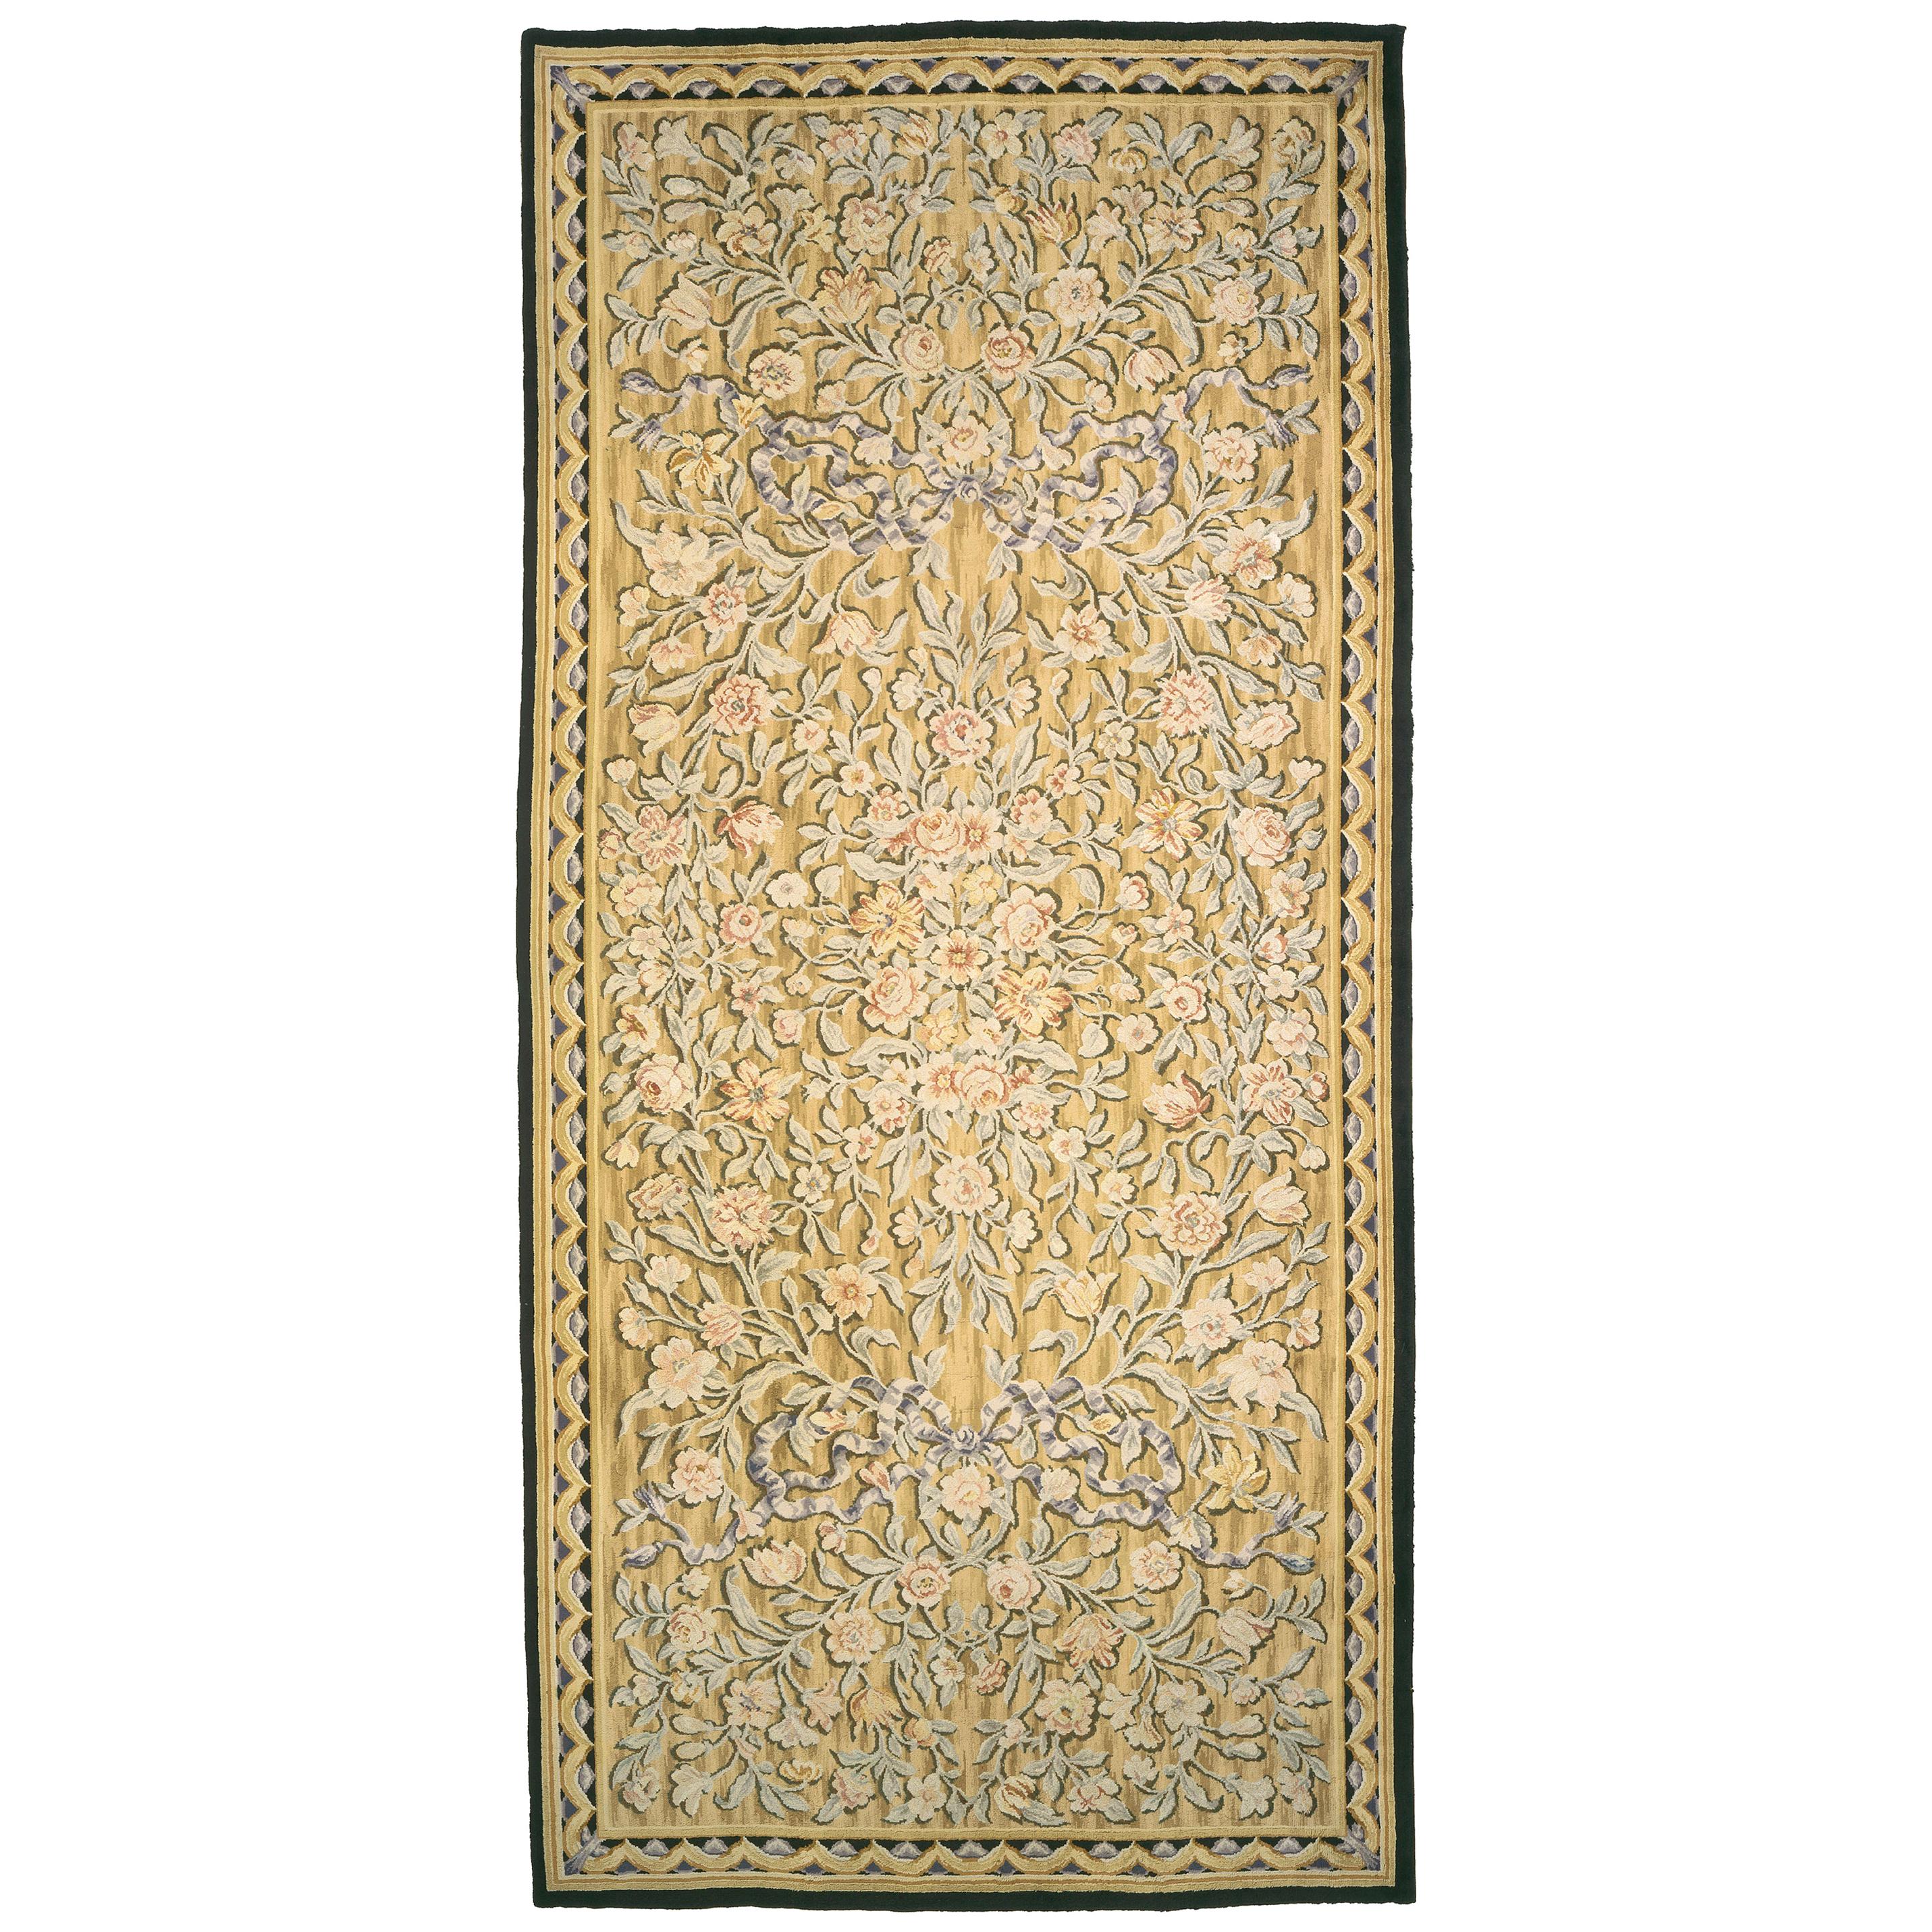 Early 20th Century French Savonnerie Rug